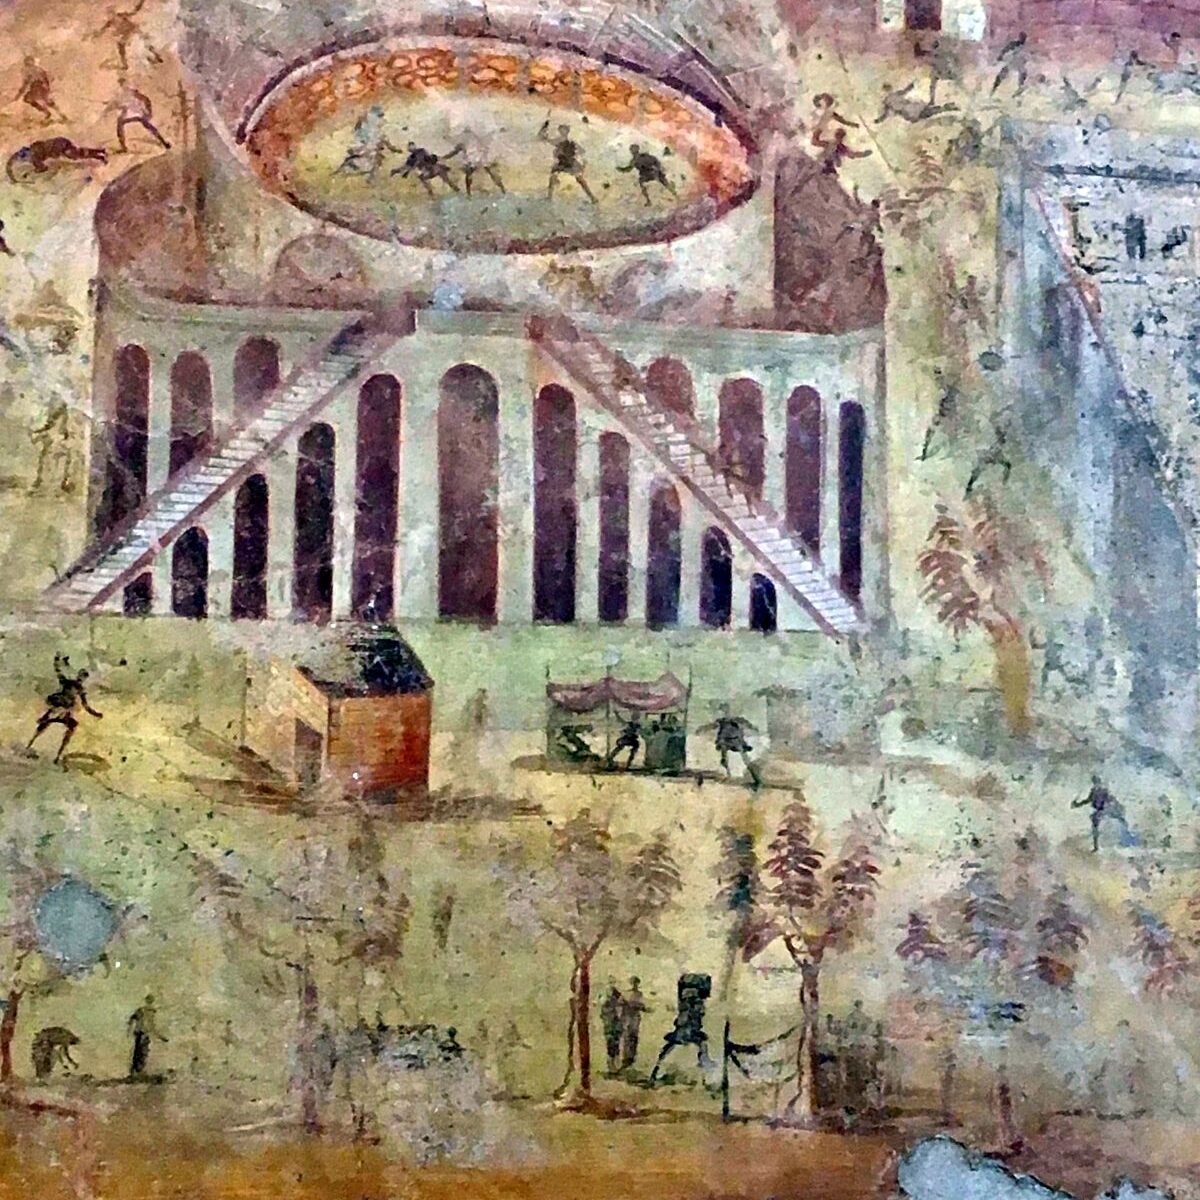 Pompeian fresco showing the clash of fans in the arena